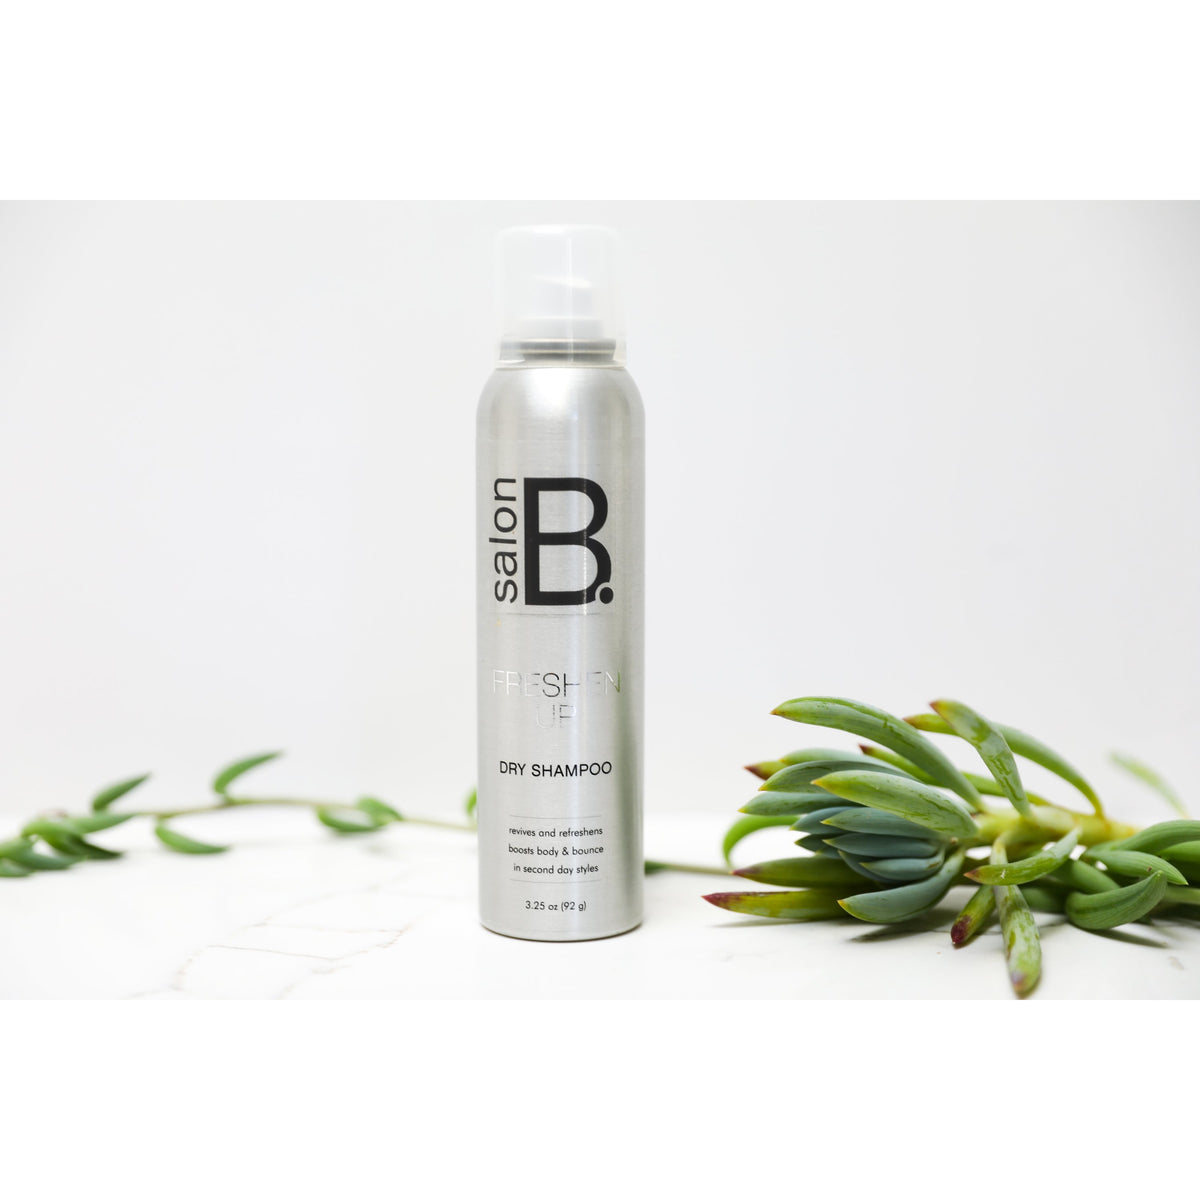 Freshen Up Dry Shampoo  • Skip a day and save time • Dry shampoo revives and refreshens • Never feels wet or sticky • Extends color and blowouts • Eliminates odor with fresh scent